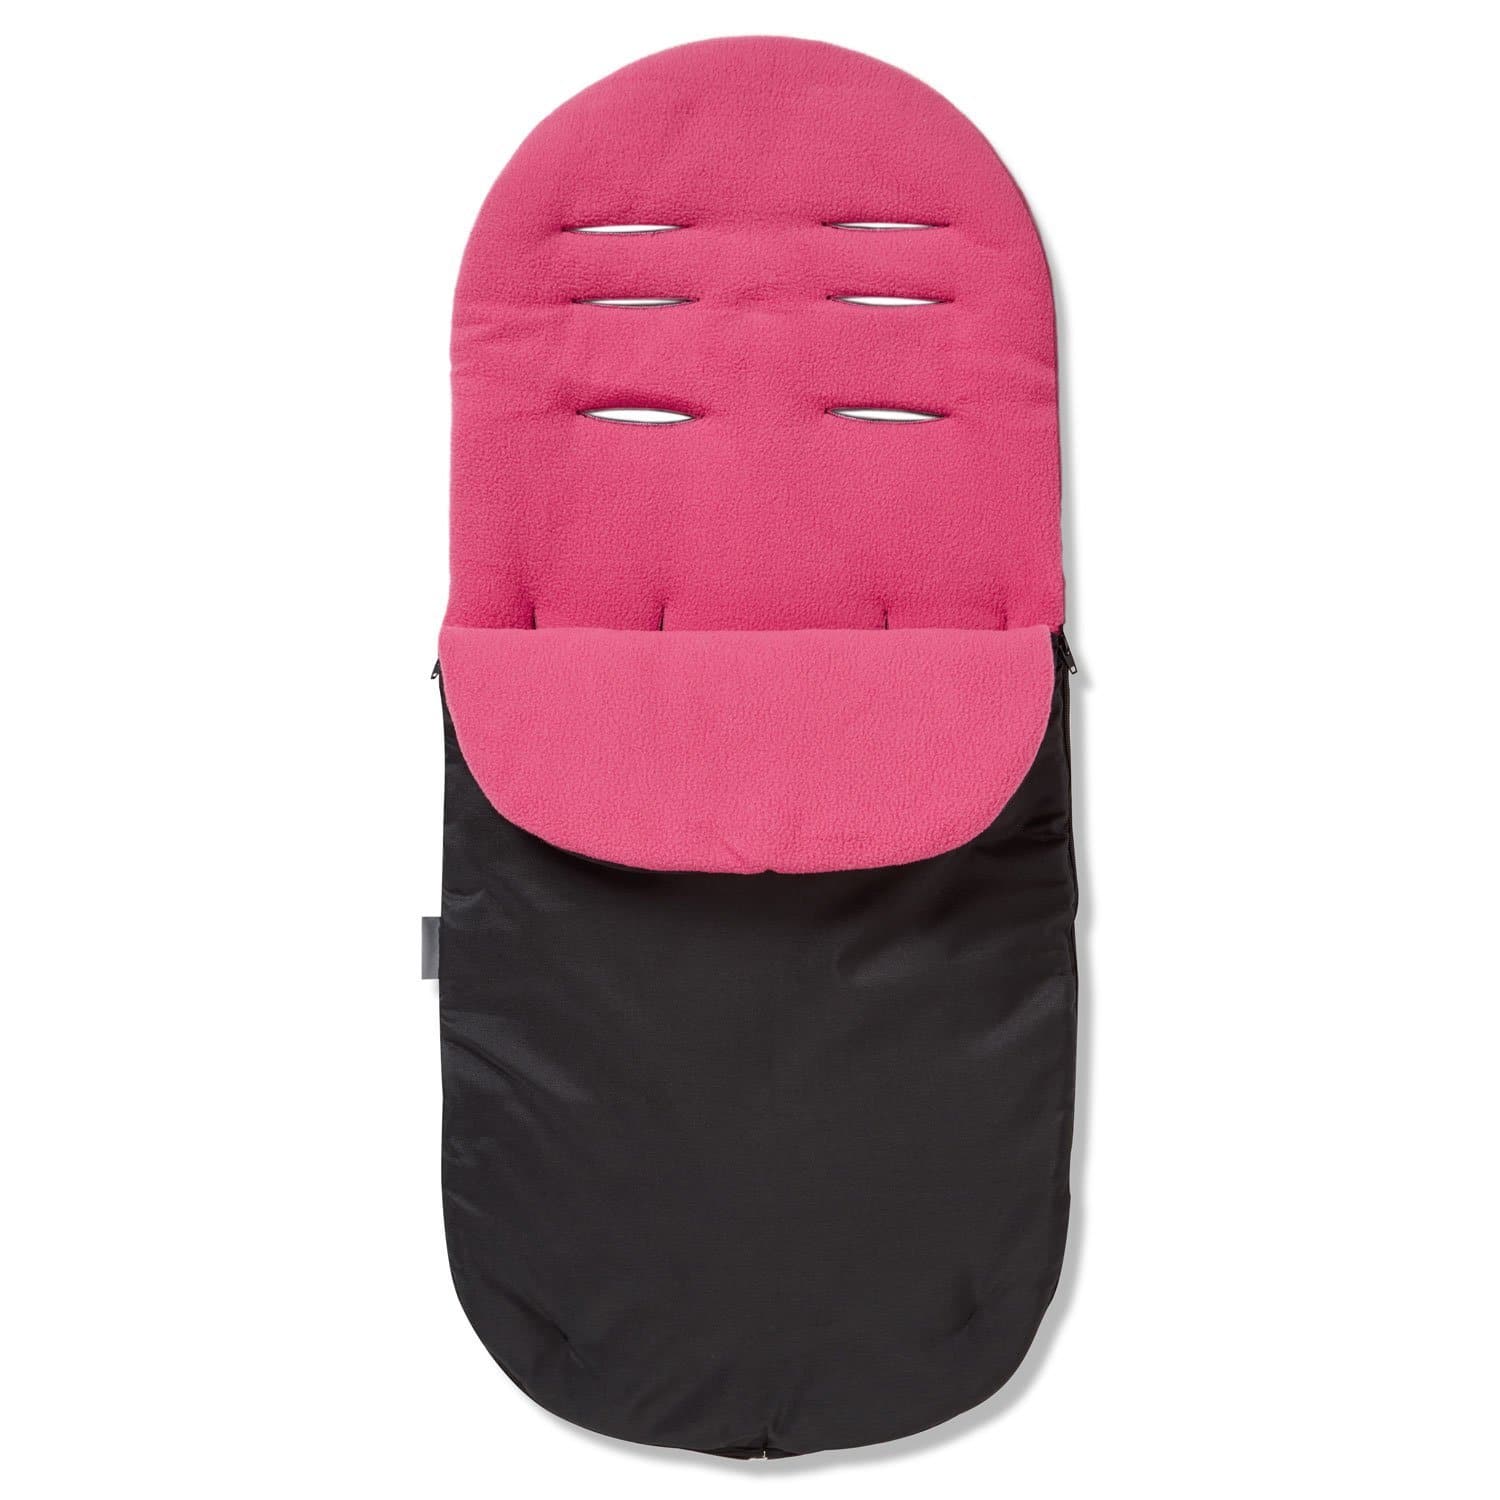 Footmuff / Cosy Toes Compatible with Red Kite - Dark Pink / Fits All Models | For Your Little One